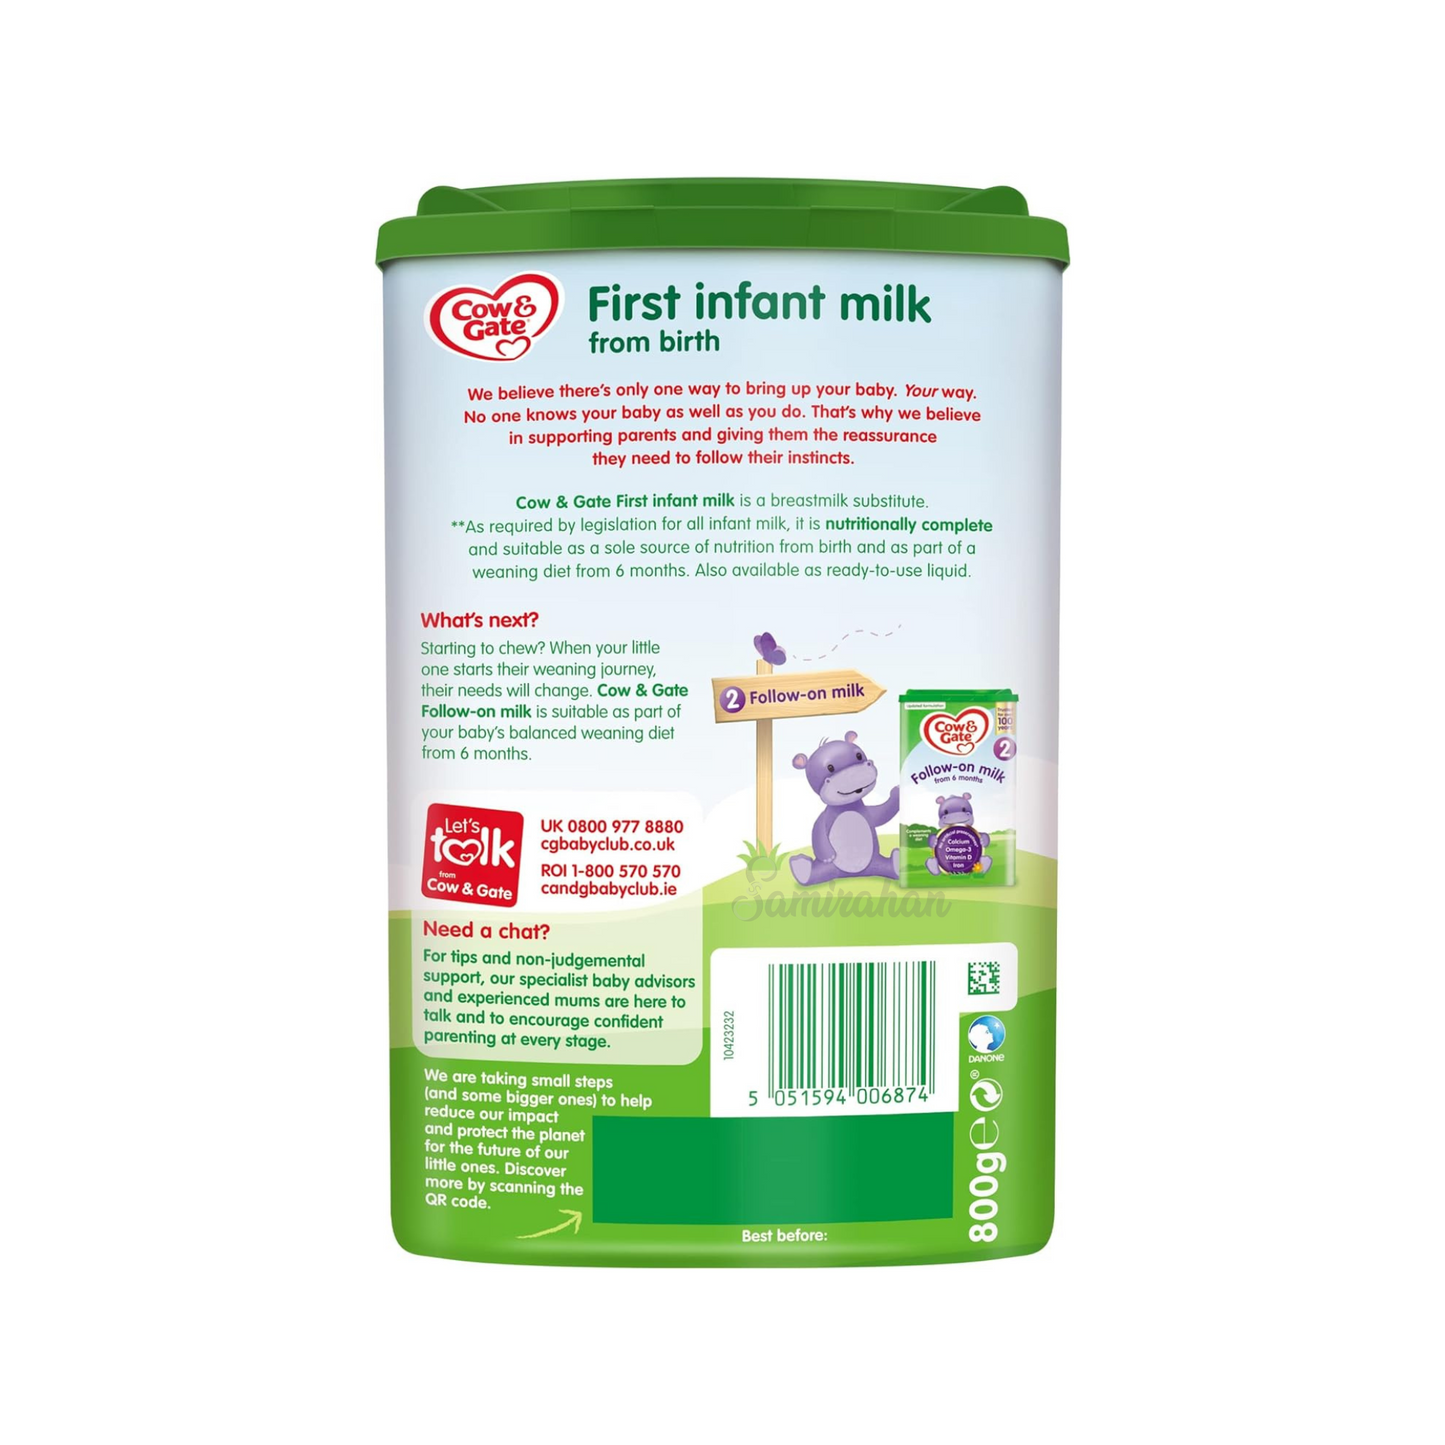 Cow & Gate Stage 1 First Baby Formula is a nutritionally complete premium milk powder, suitable for infants from birth to 6 months. Halal vegetarian certified best imported foreign genuine real authentic UK British English cow quality safe healthy feeding food growth cheap price in Dhaka Sylhet Chittagong Bangladesh